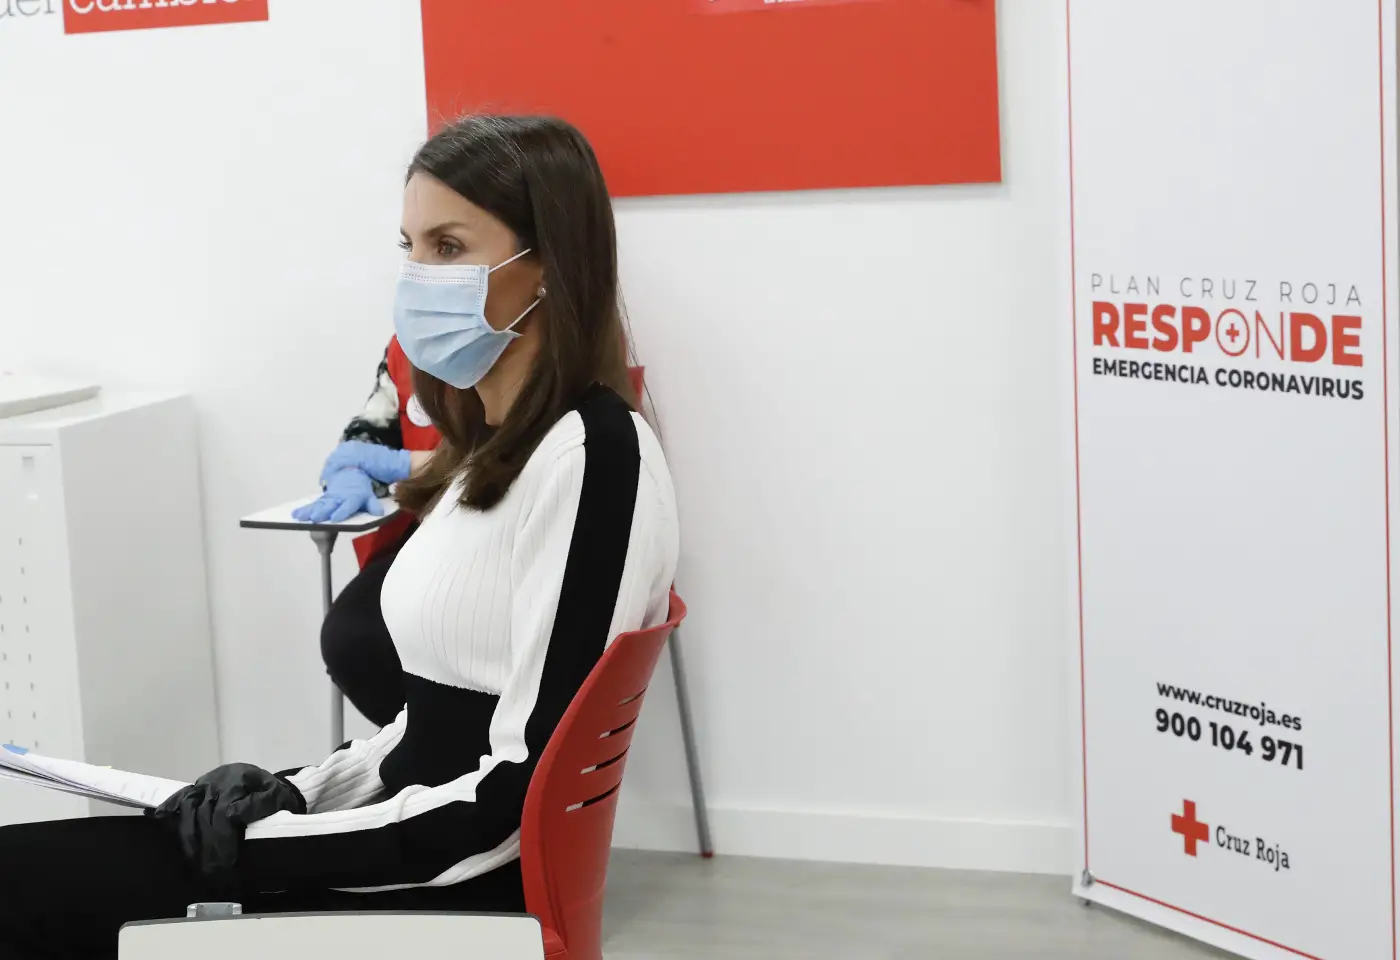 Queen Letizia of Spain learnt the working of Volunteers at the Red cross during the coronavirus